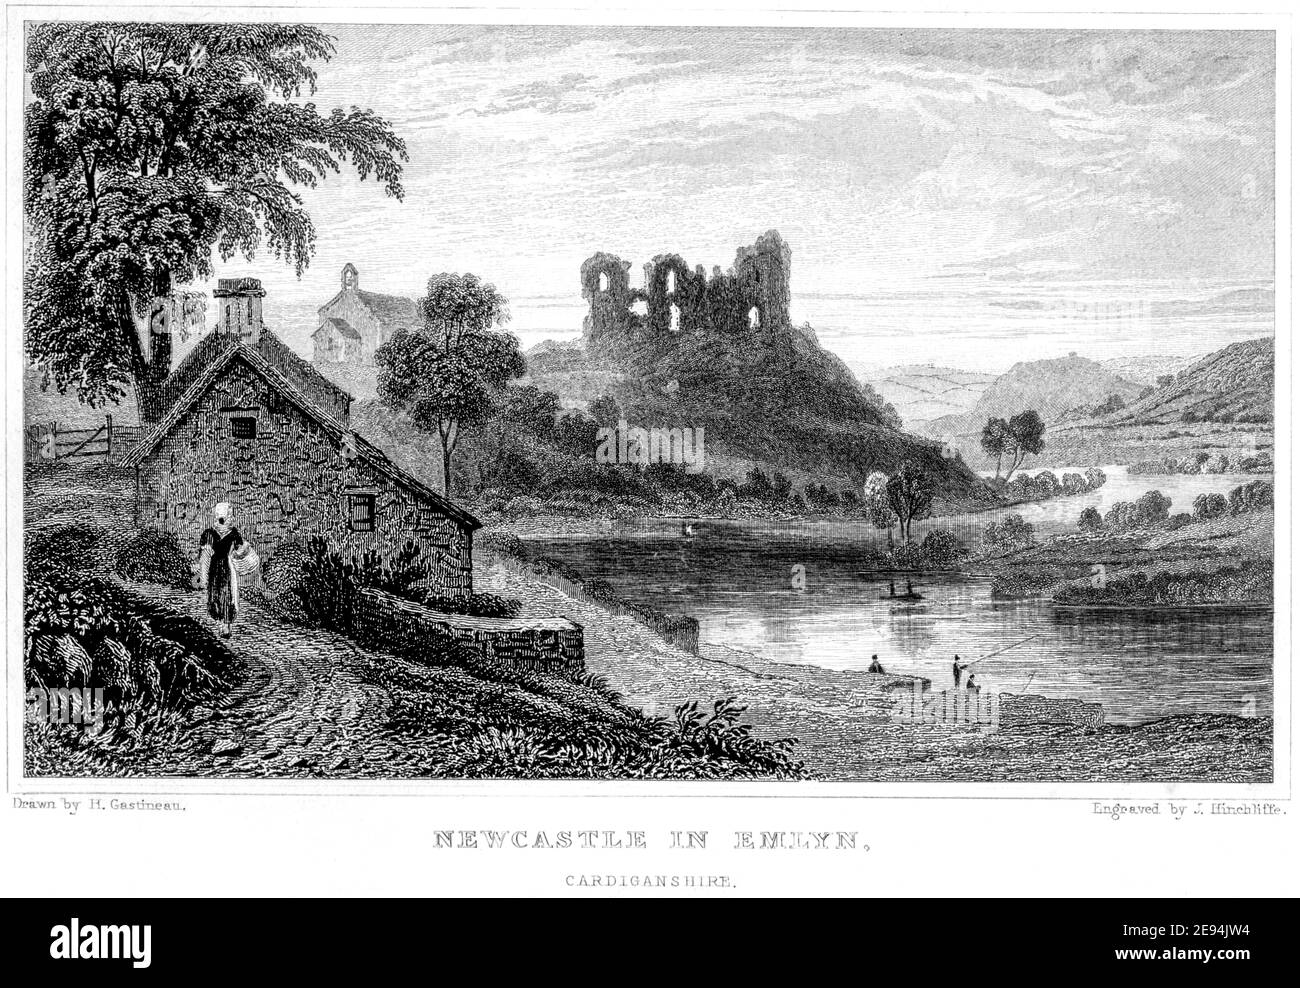 An engraving of Newcastle In Emlyn, Cardiganshire scanned at high resolution from a book published in 1854.  Believed copyright free. Stock Photo